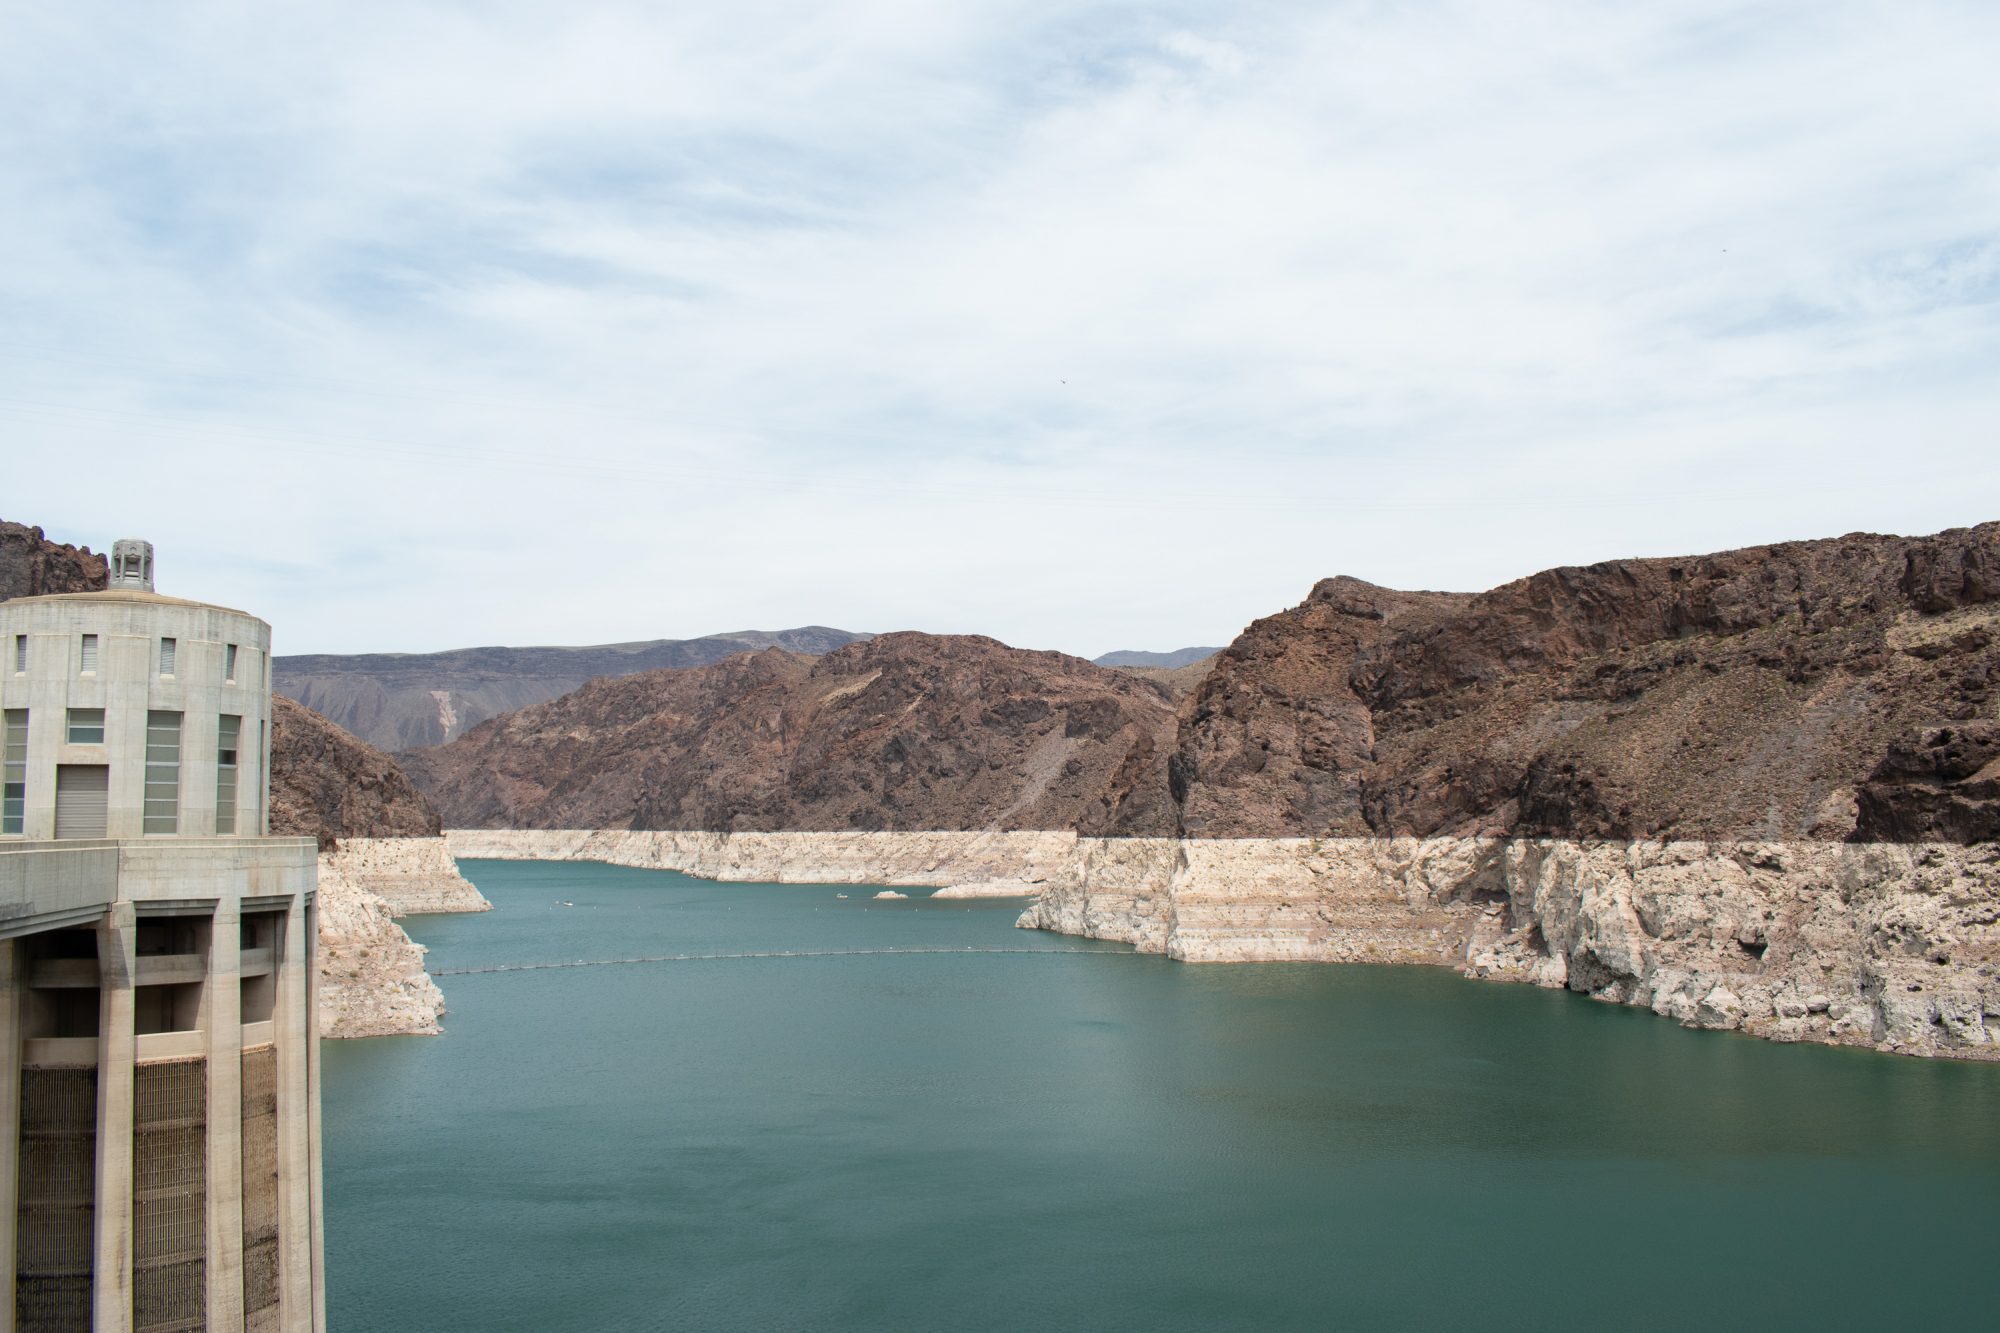 Reasons to be optimistic about Arizona's water future - Chamber Business News